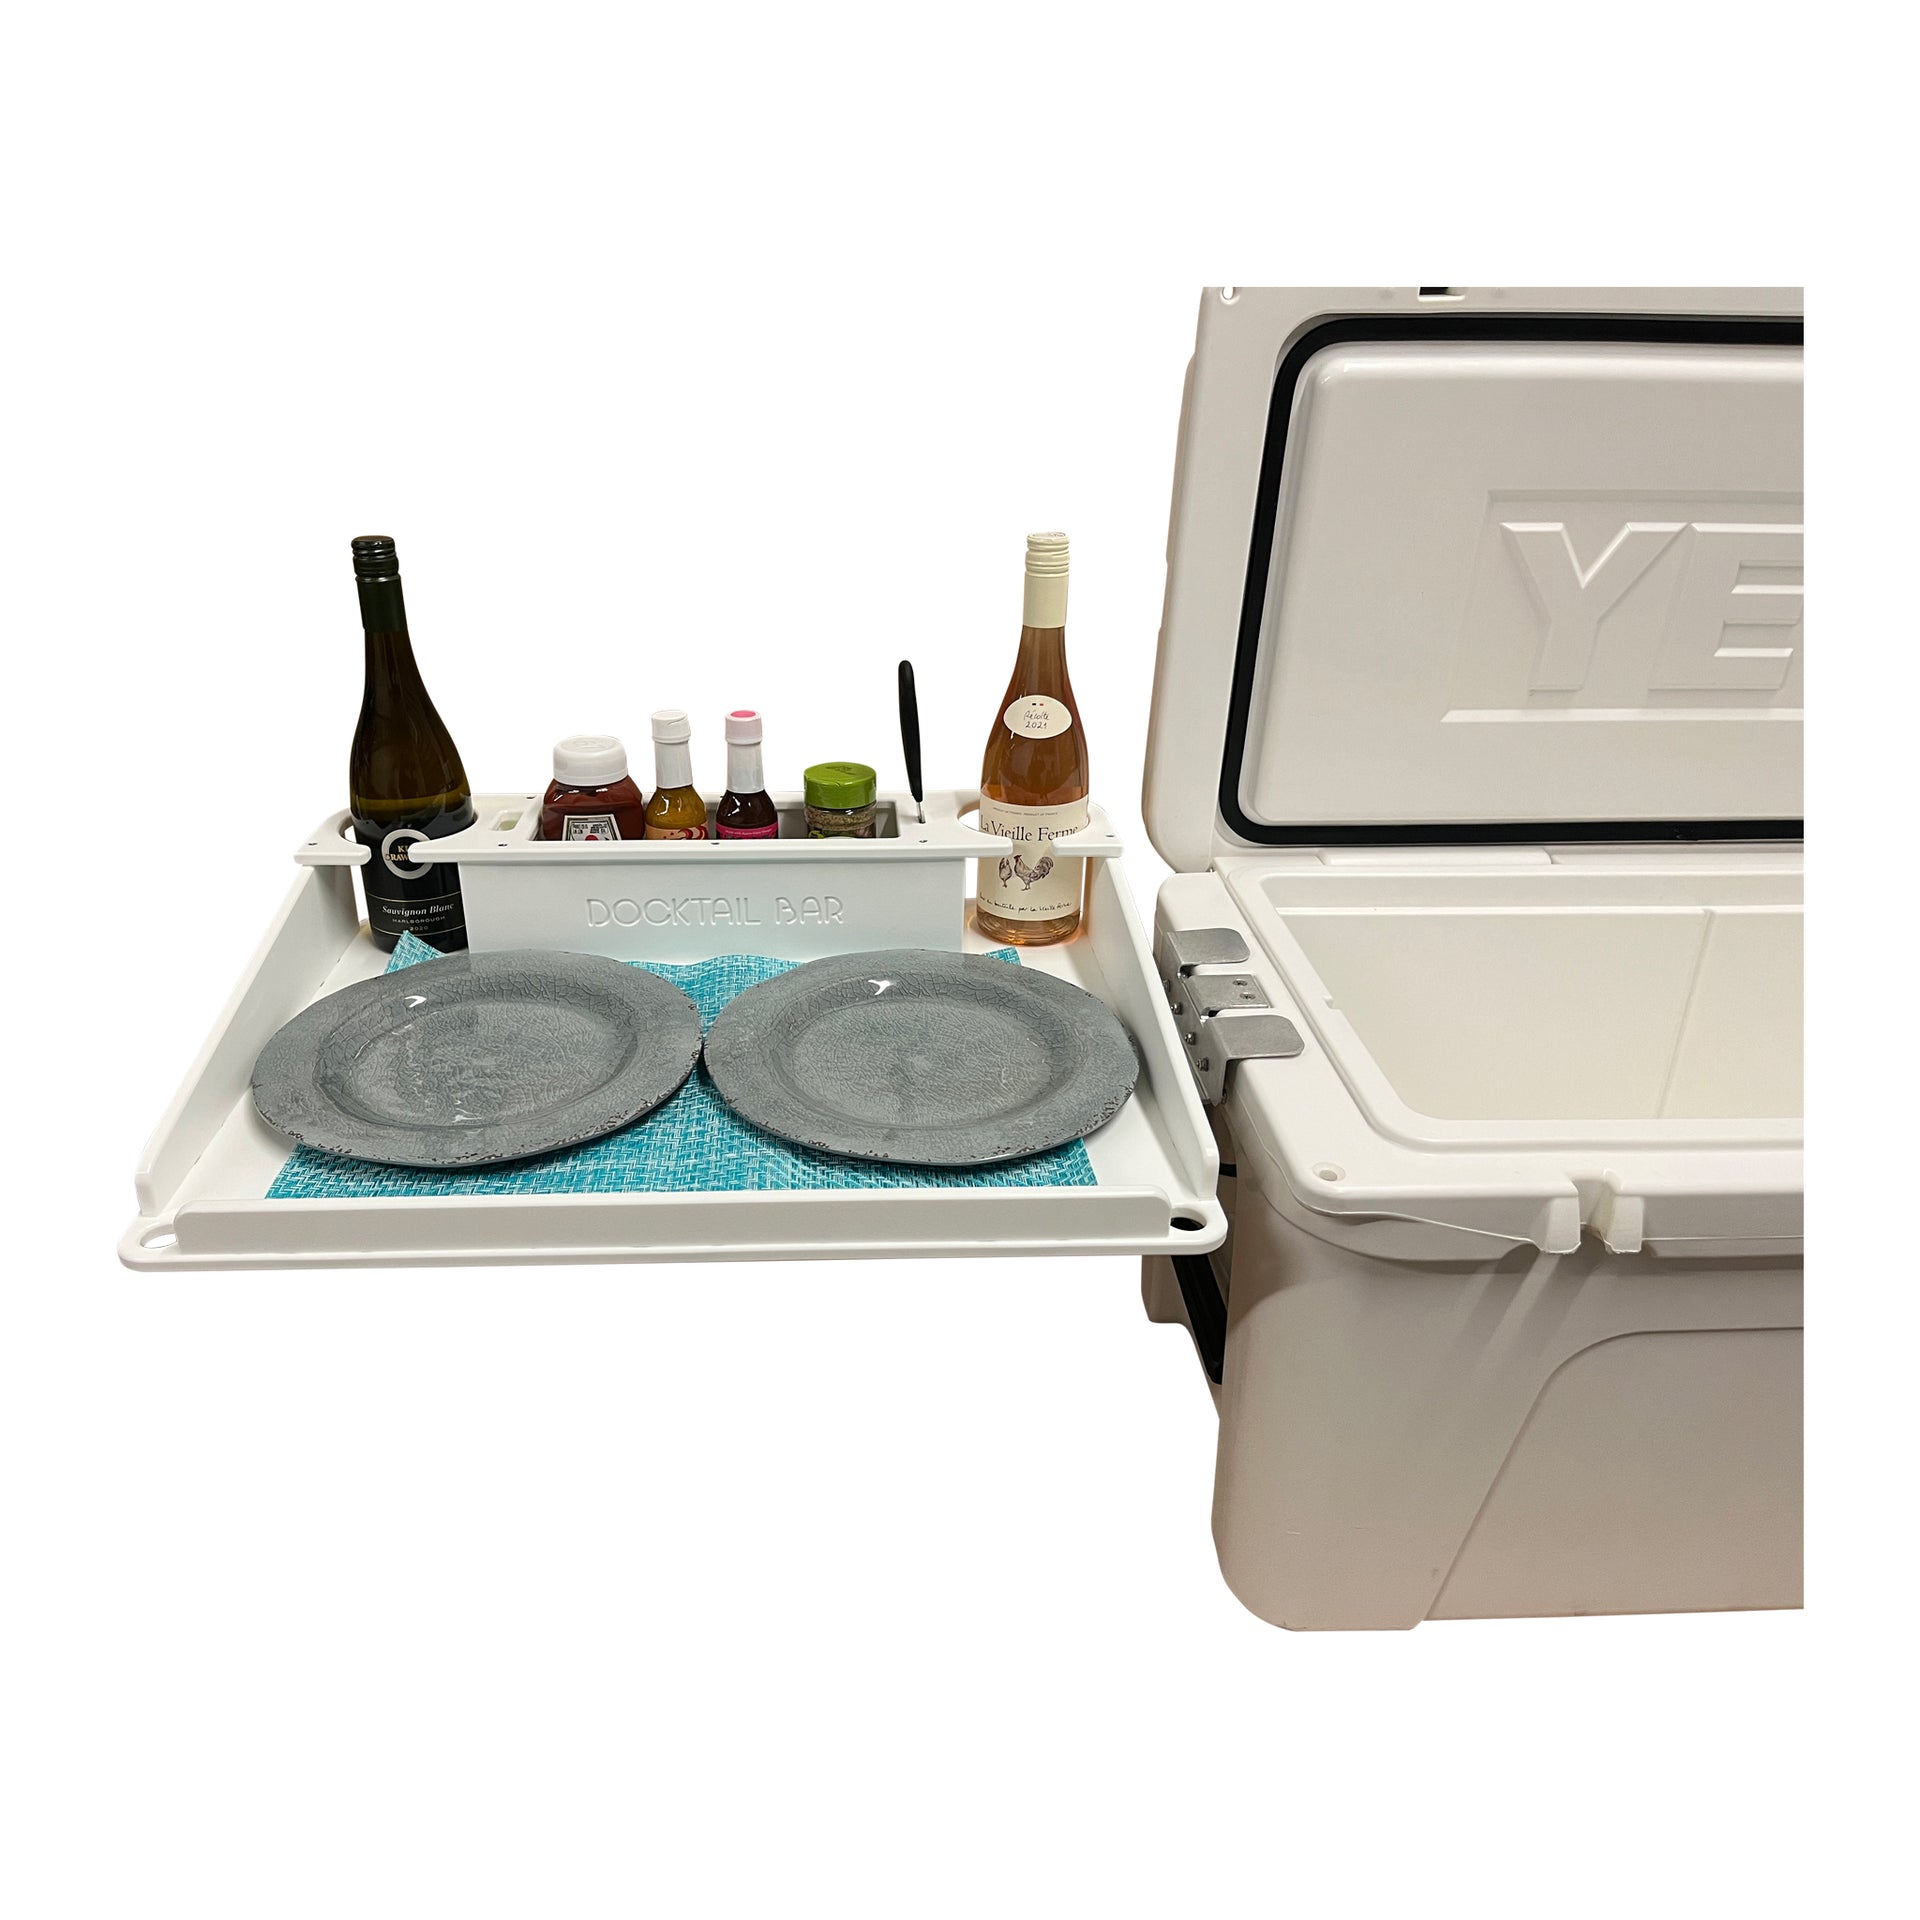 Docktail Bar Yeti Tundra Cooler Mount and Table System